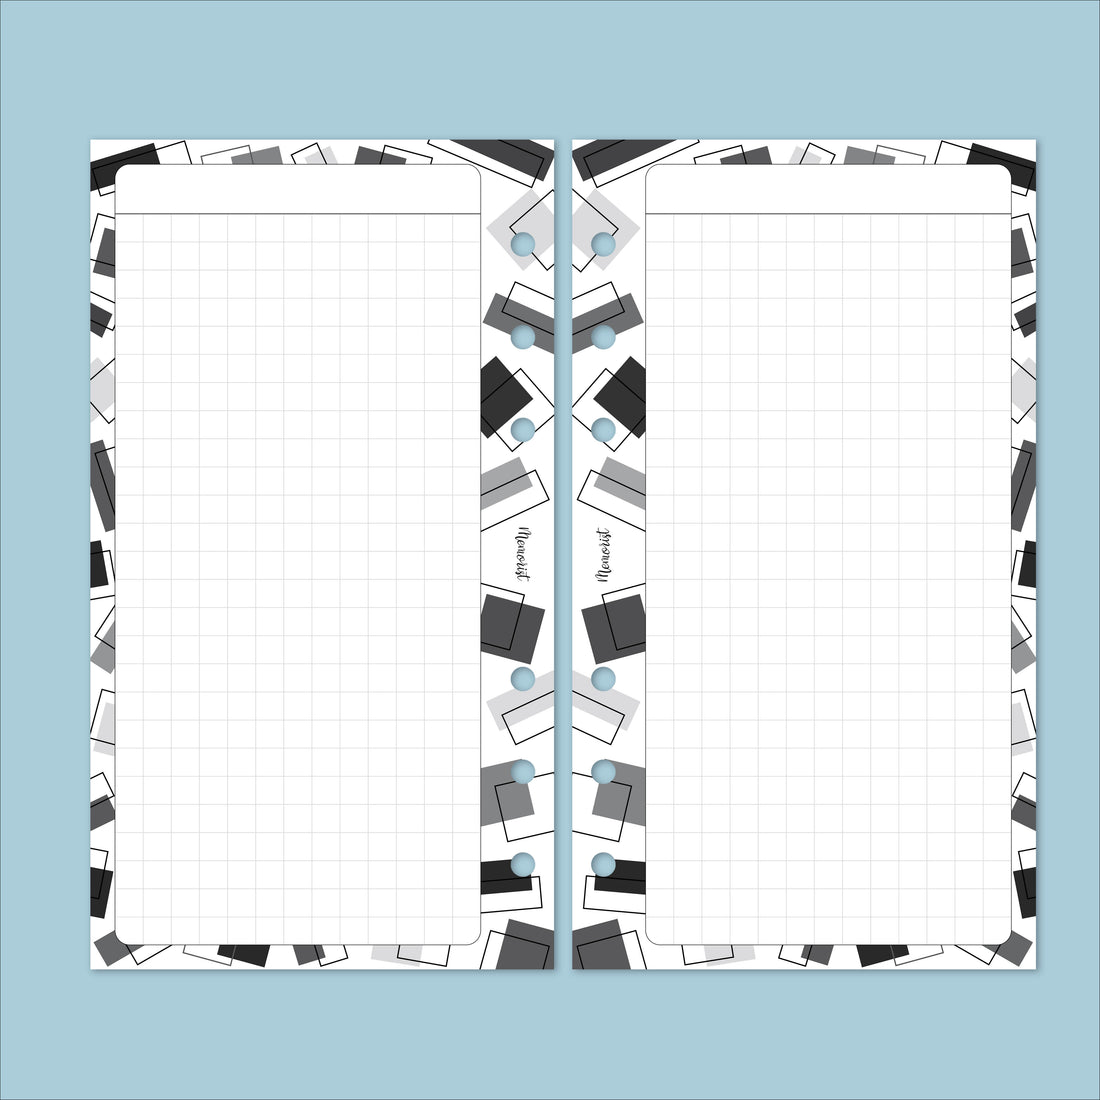 Design Grid: Pattern 002 (Personal Size)